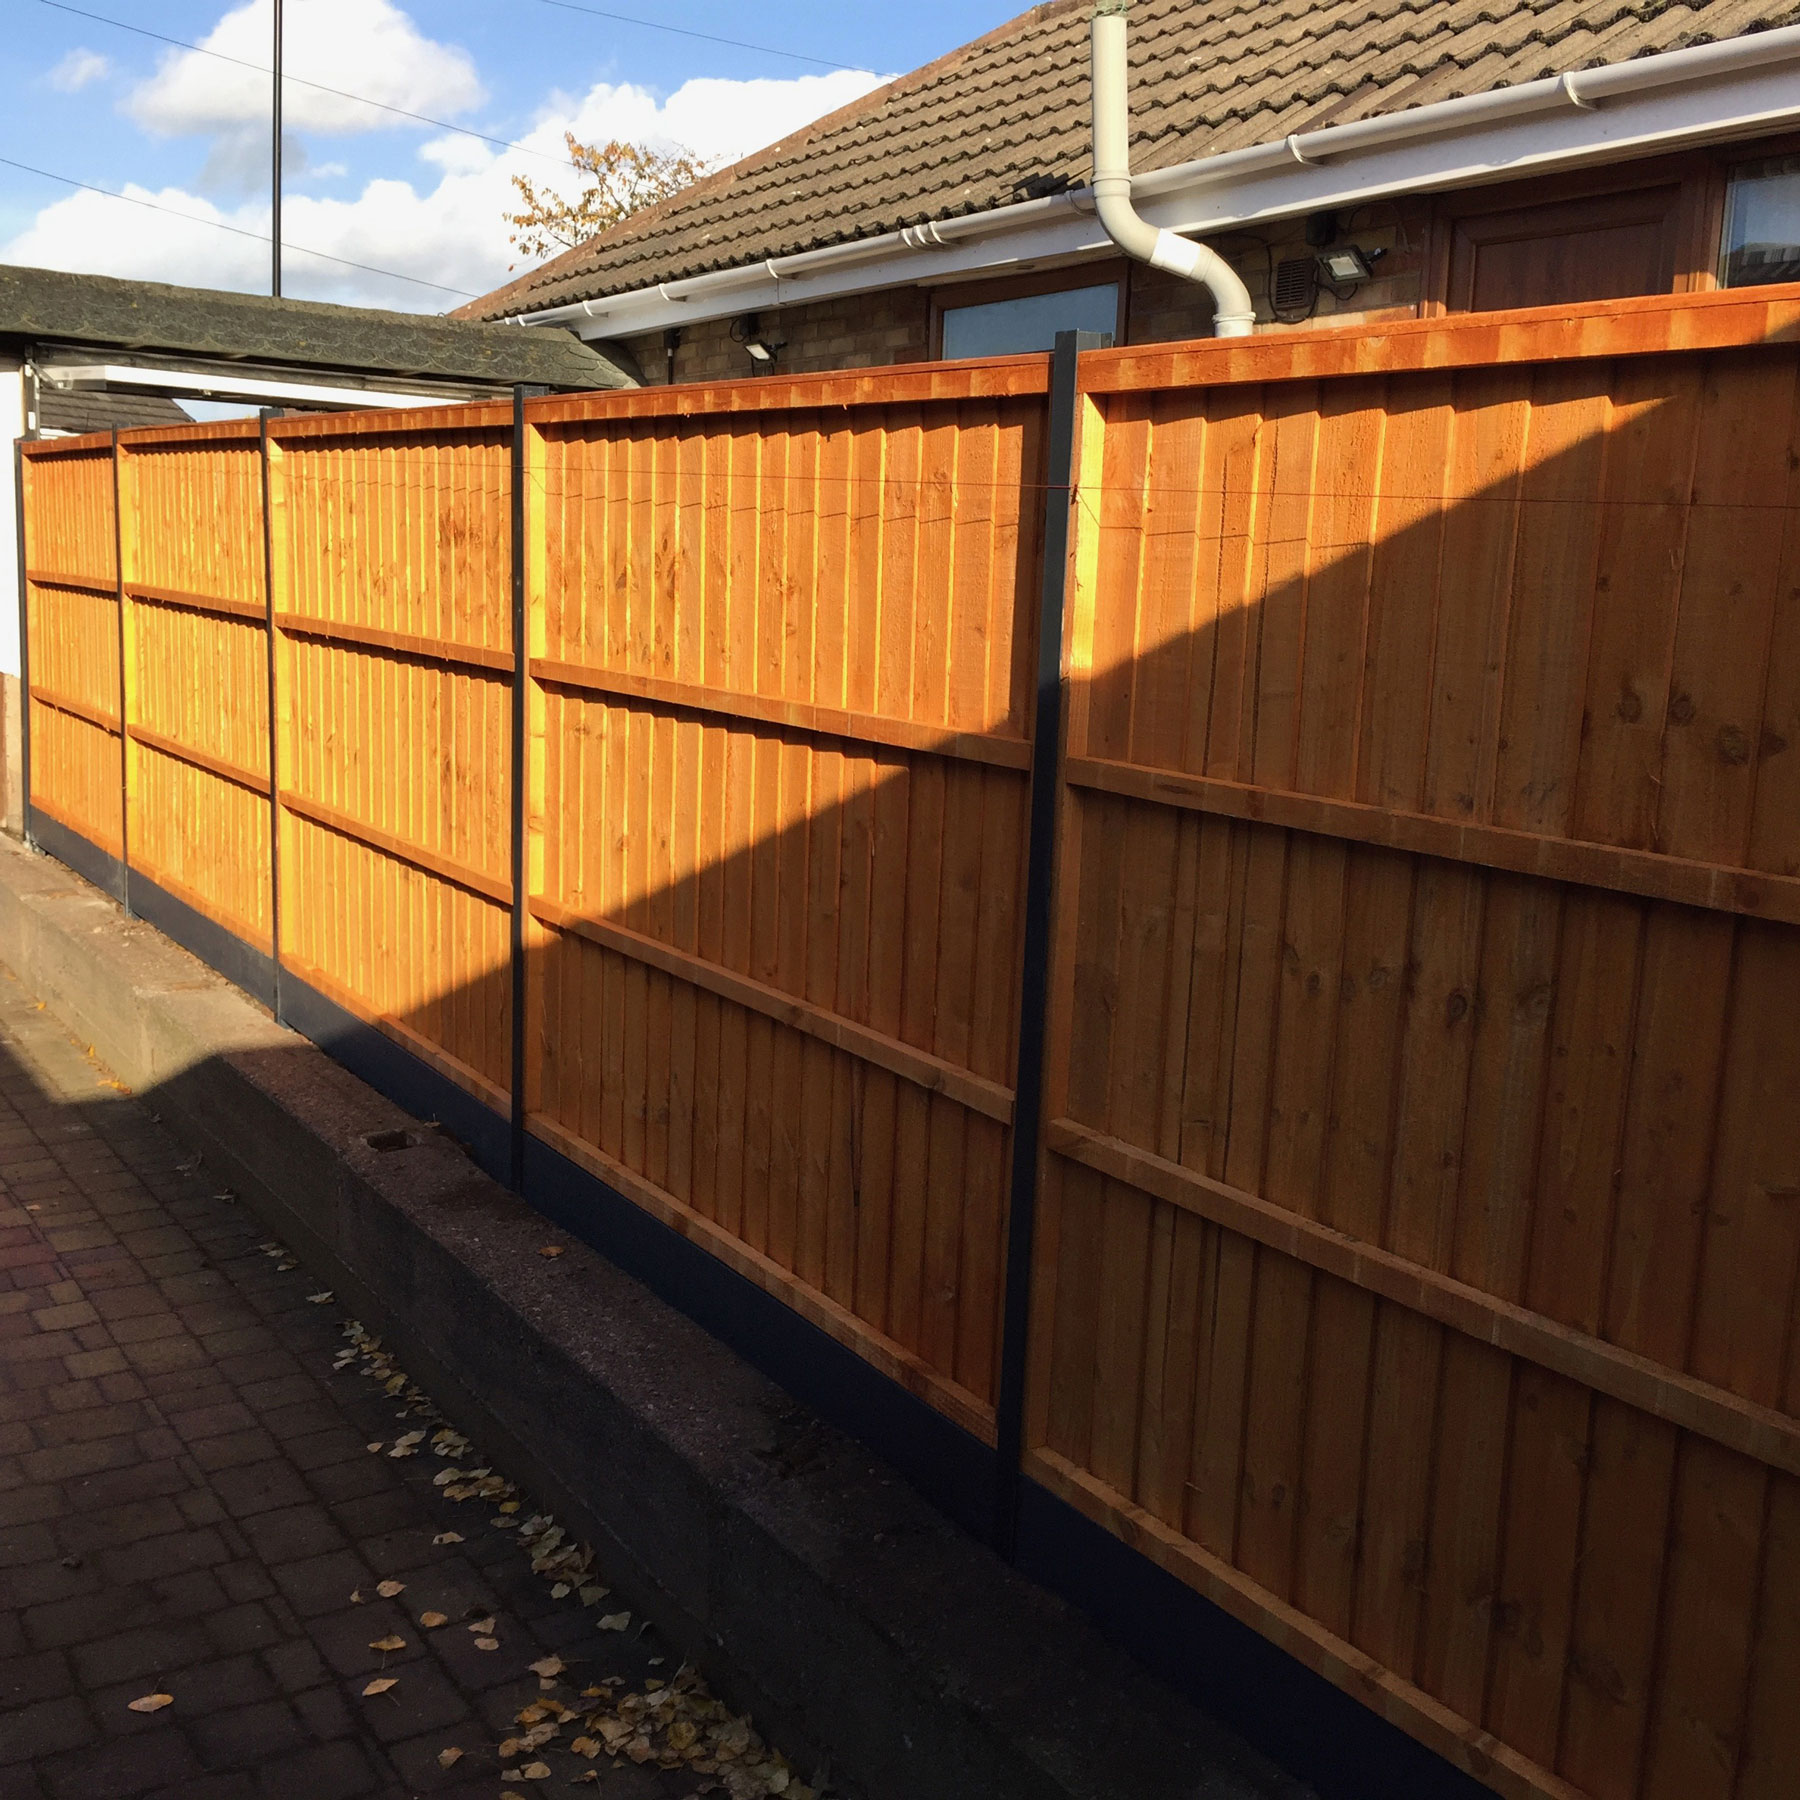 Fifth 5 feet high fence panel fitted 